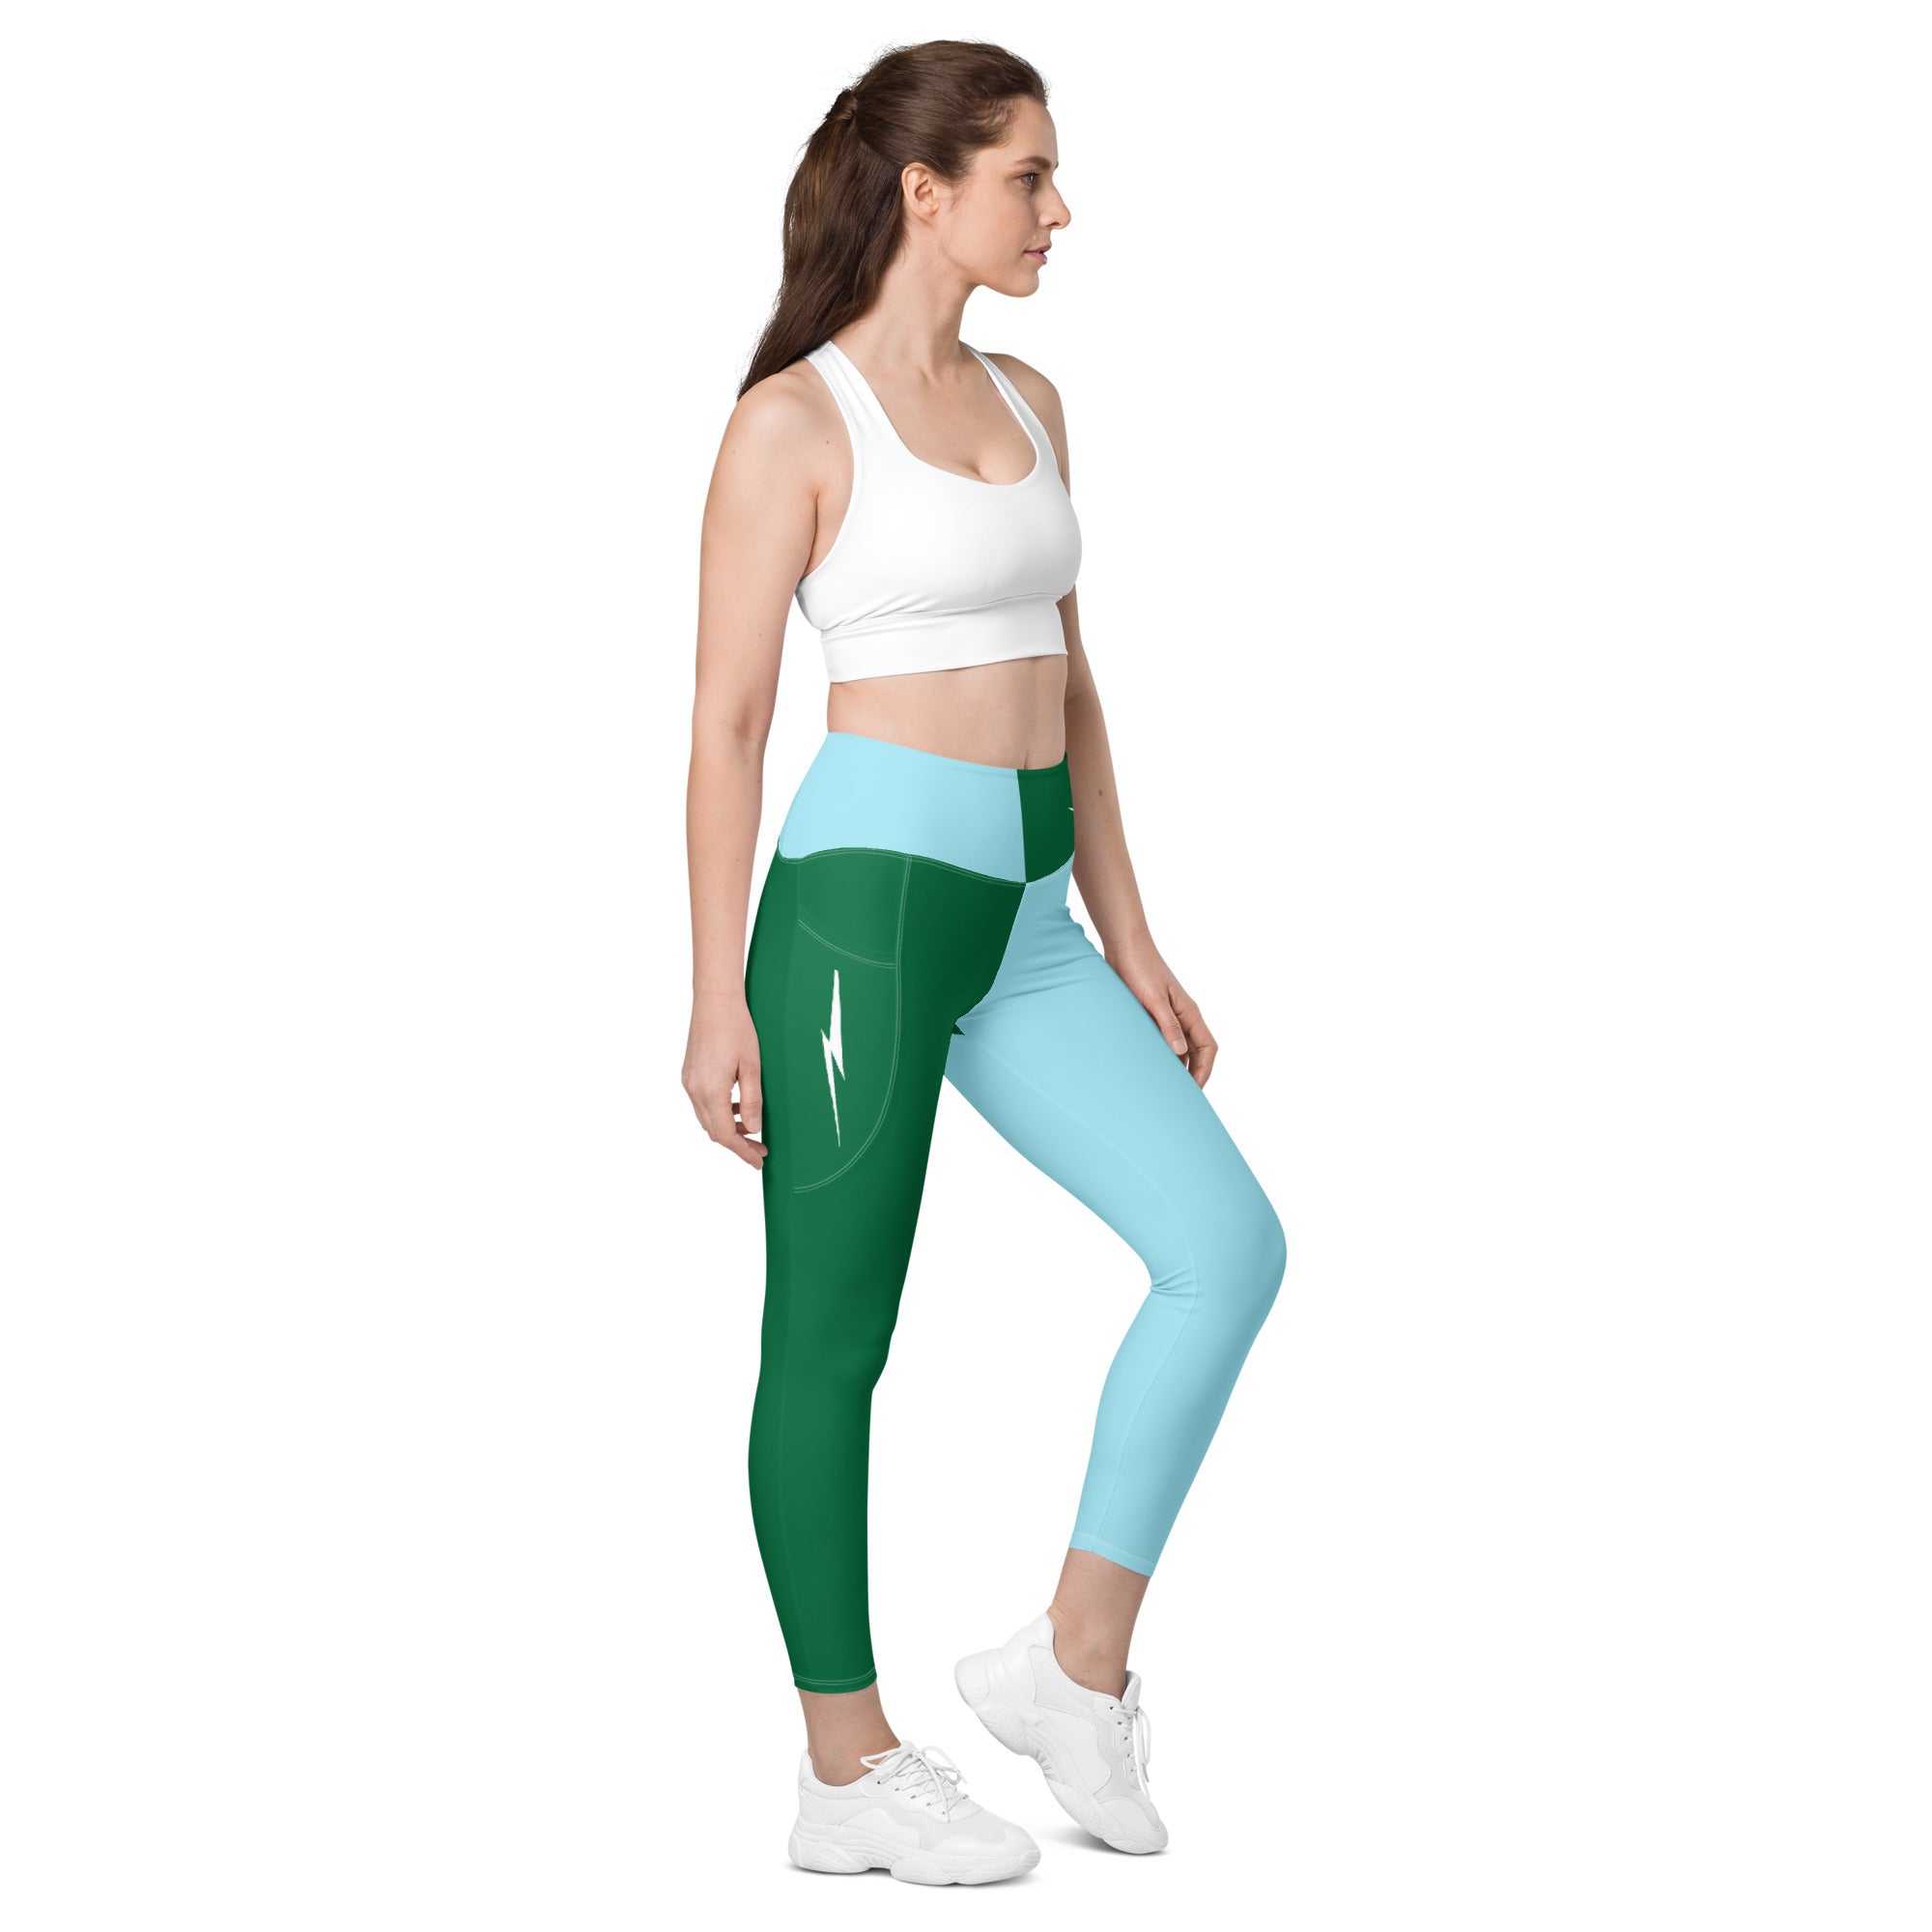 Green & Blue Leggings with pockets